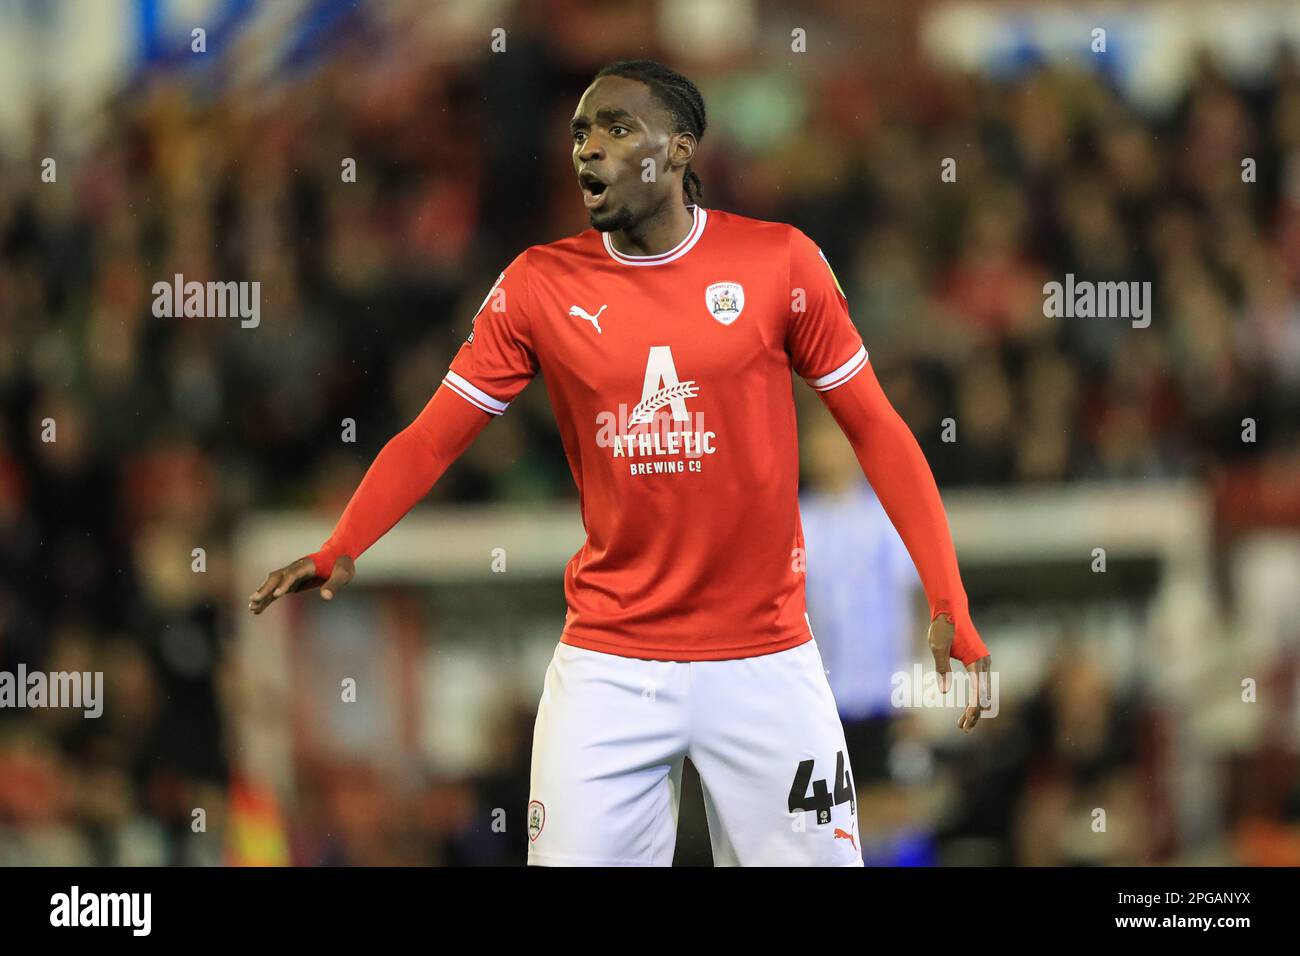 Devante Cole #44 of Barnsley during the Sky Bet League 1 match Barnsley vs Sheffield Wednesday at Oakwell, Barnsley, United Kingdom, 21st March 2023  (Photo by Alfie Cosgrove/News Images) Stock Photo